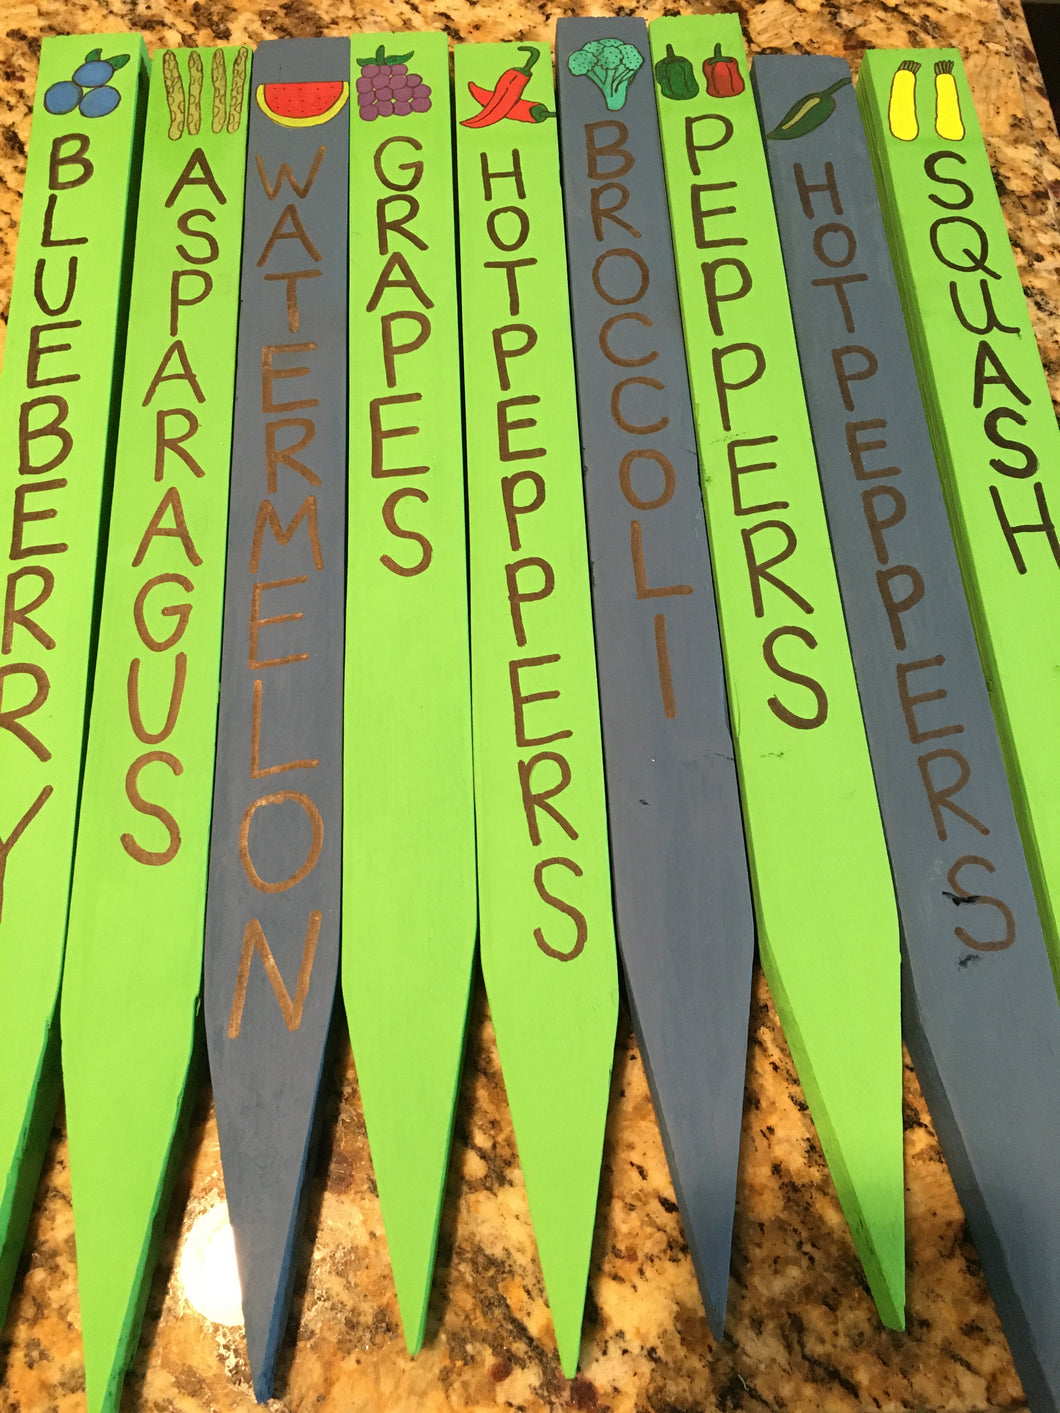 Garden stakes with names painted on (blueberry, asparagus, watermelon, grapes, hot peppers, broccoli, peppers, squash)